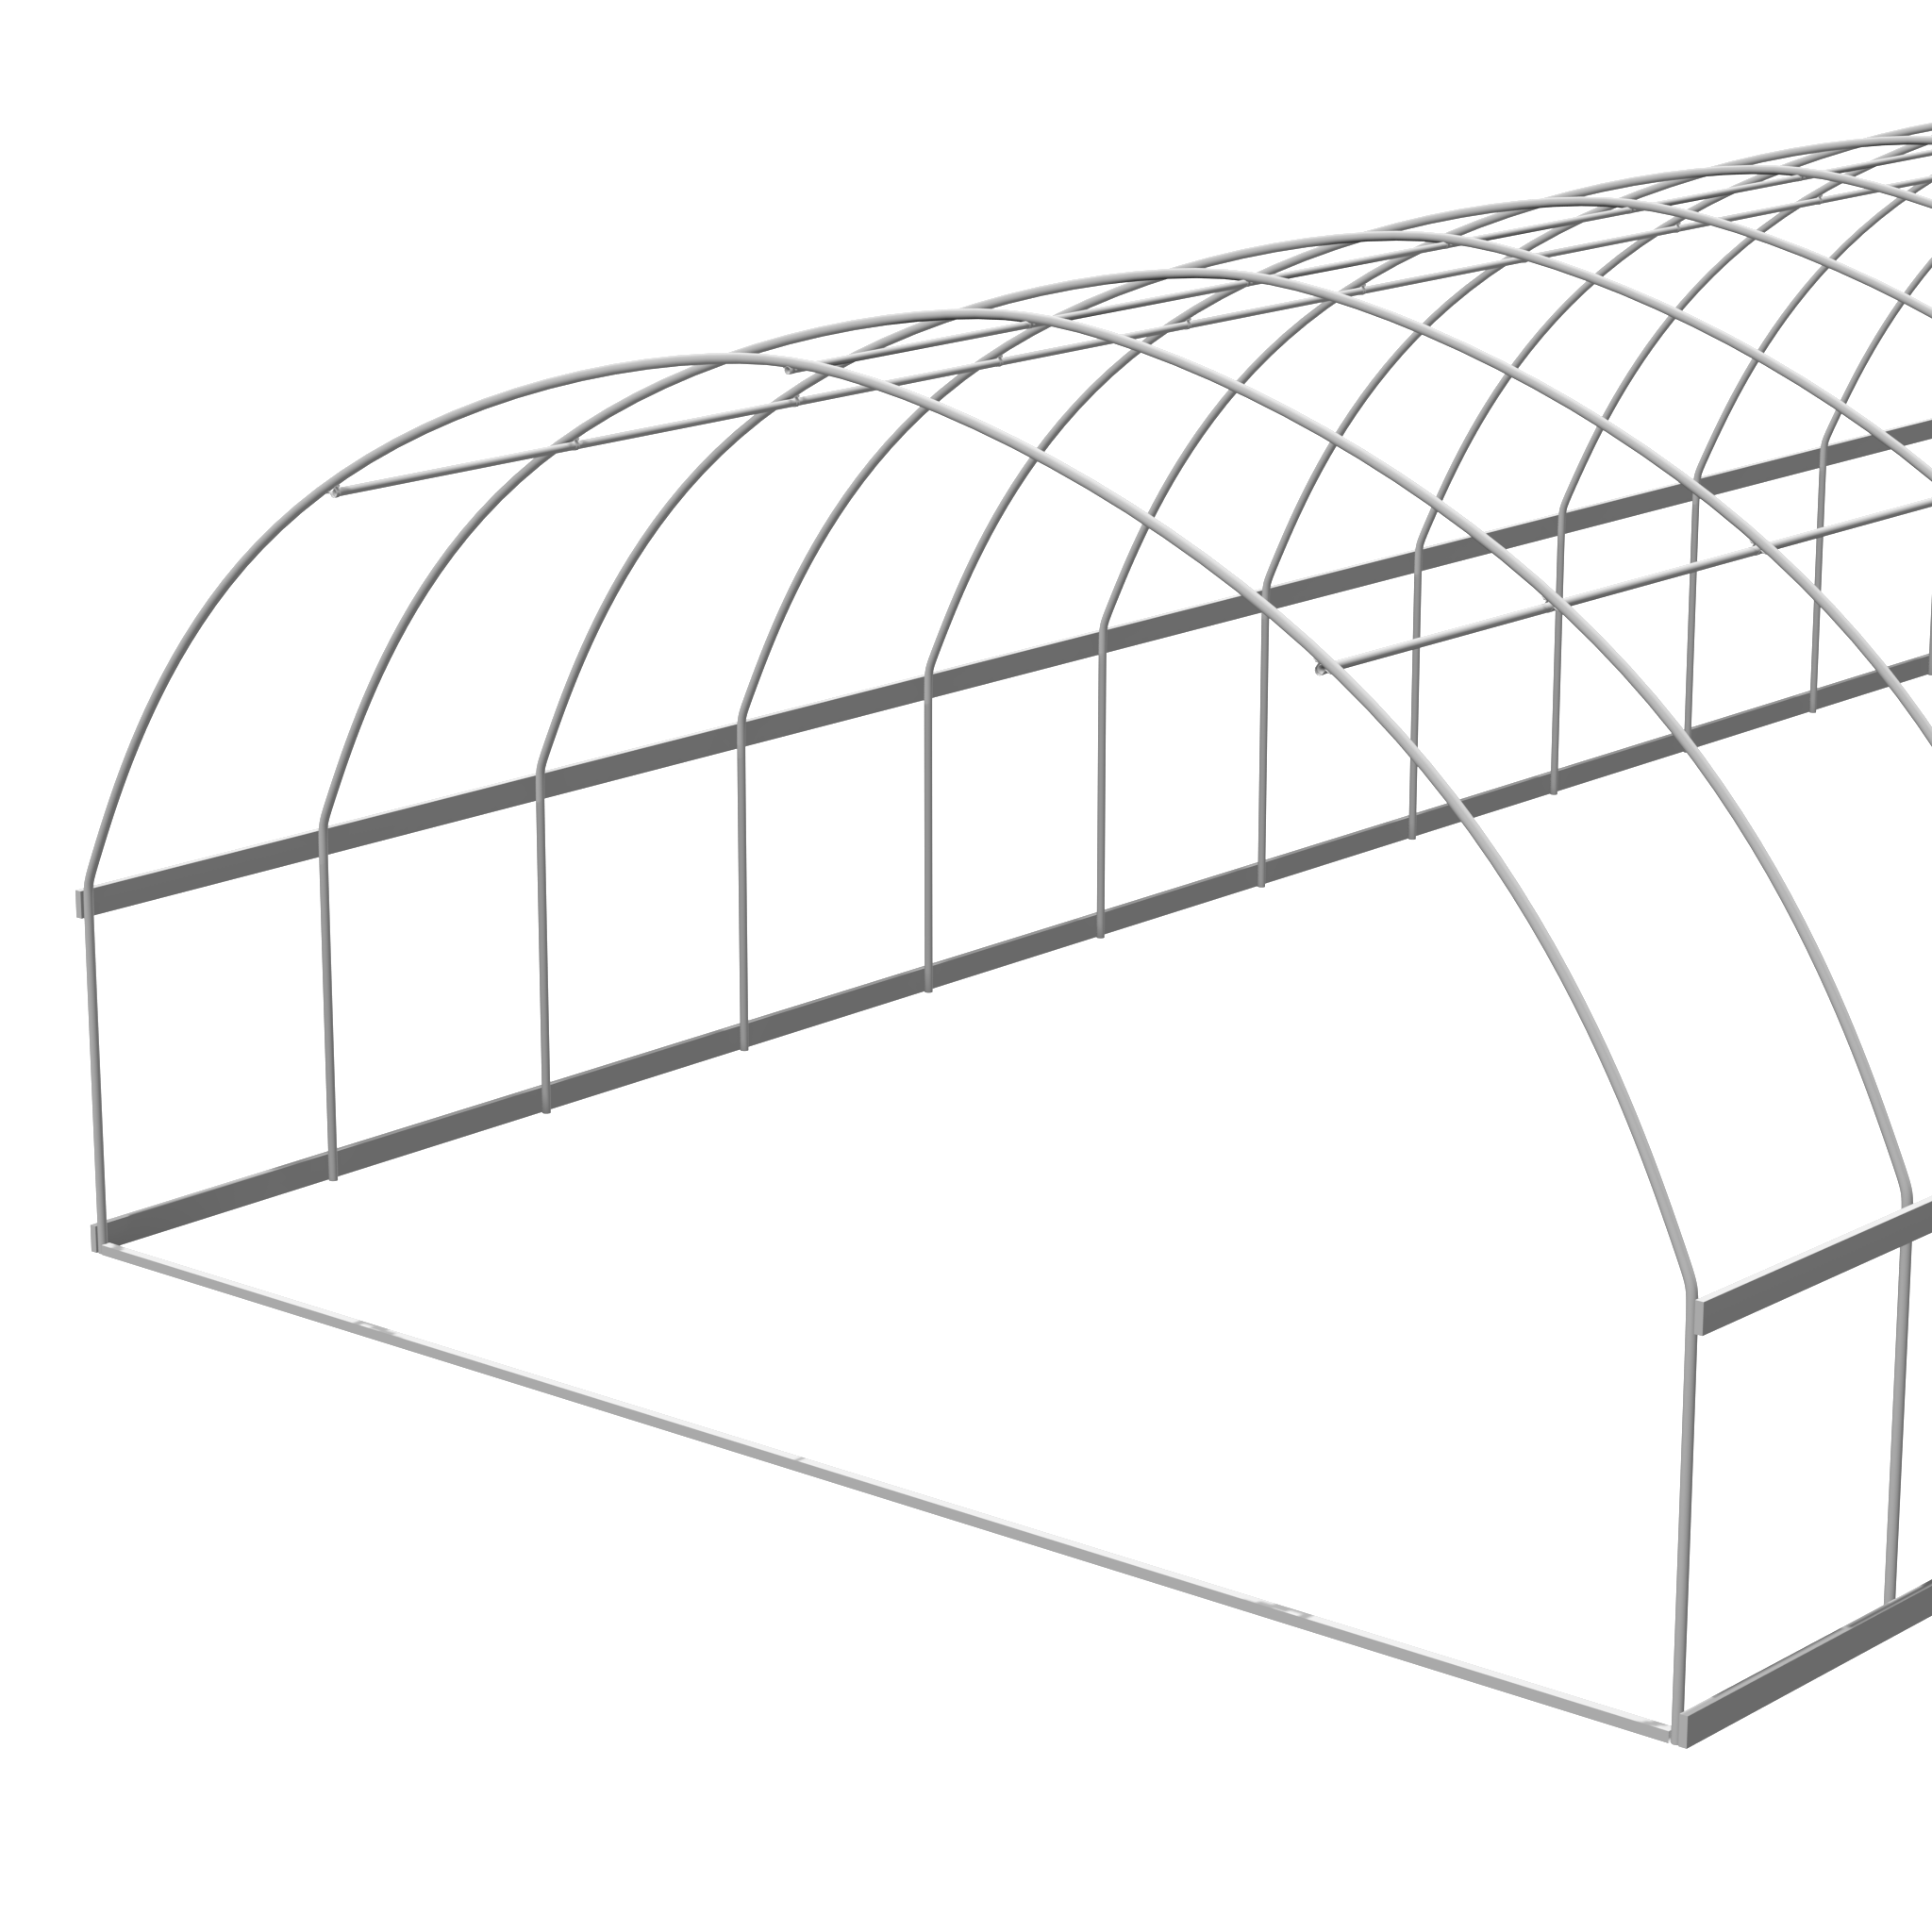 35' Quonset Greenhouse Frame